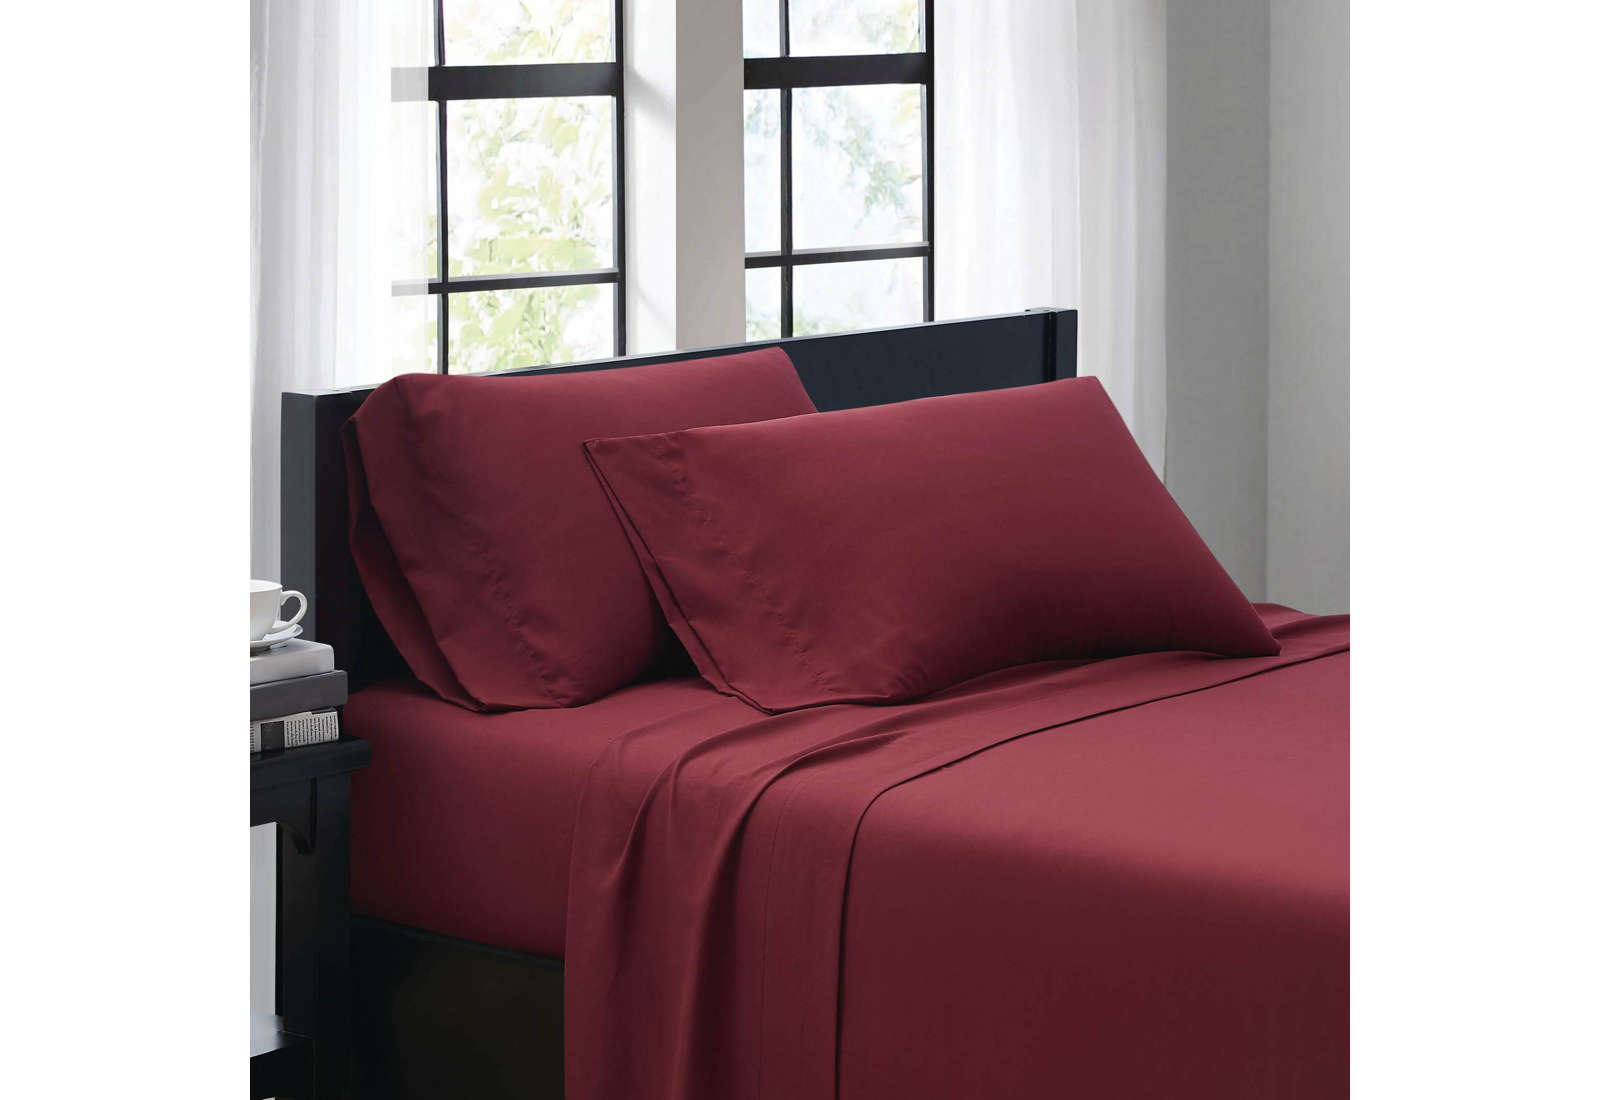 Thread Count Guide: Understanding What It Means For Bedding